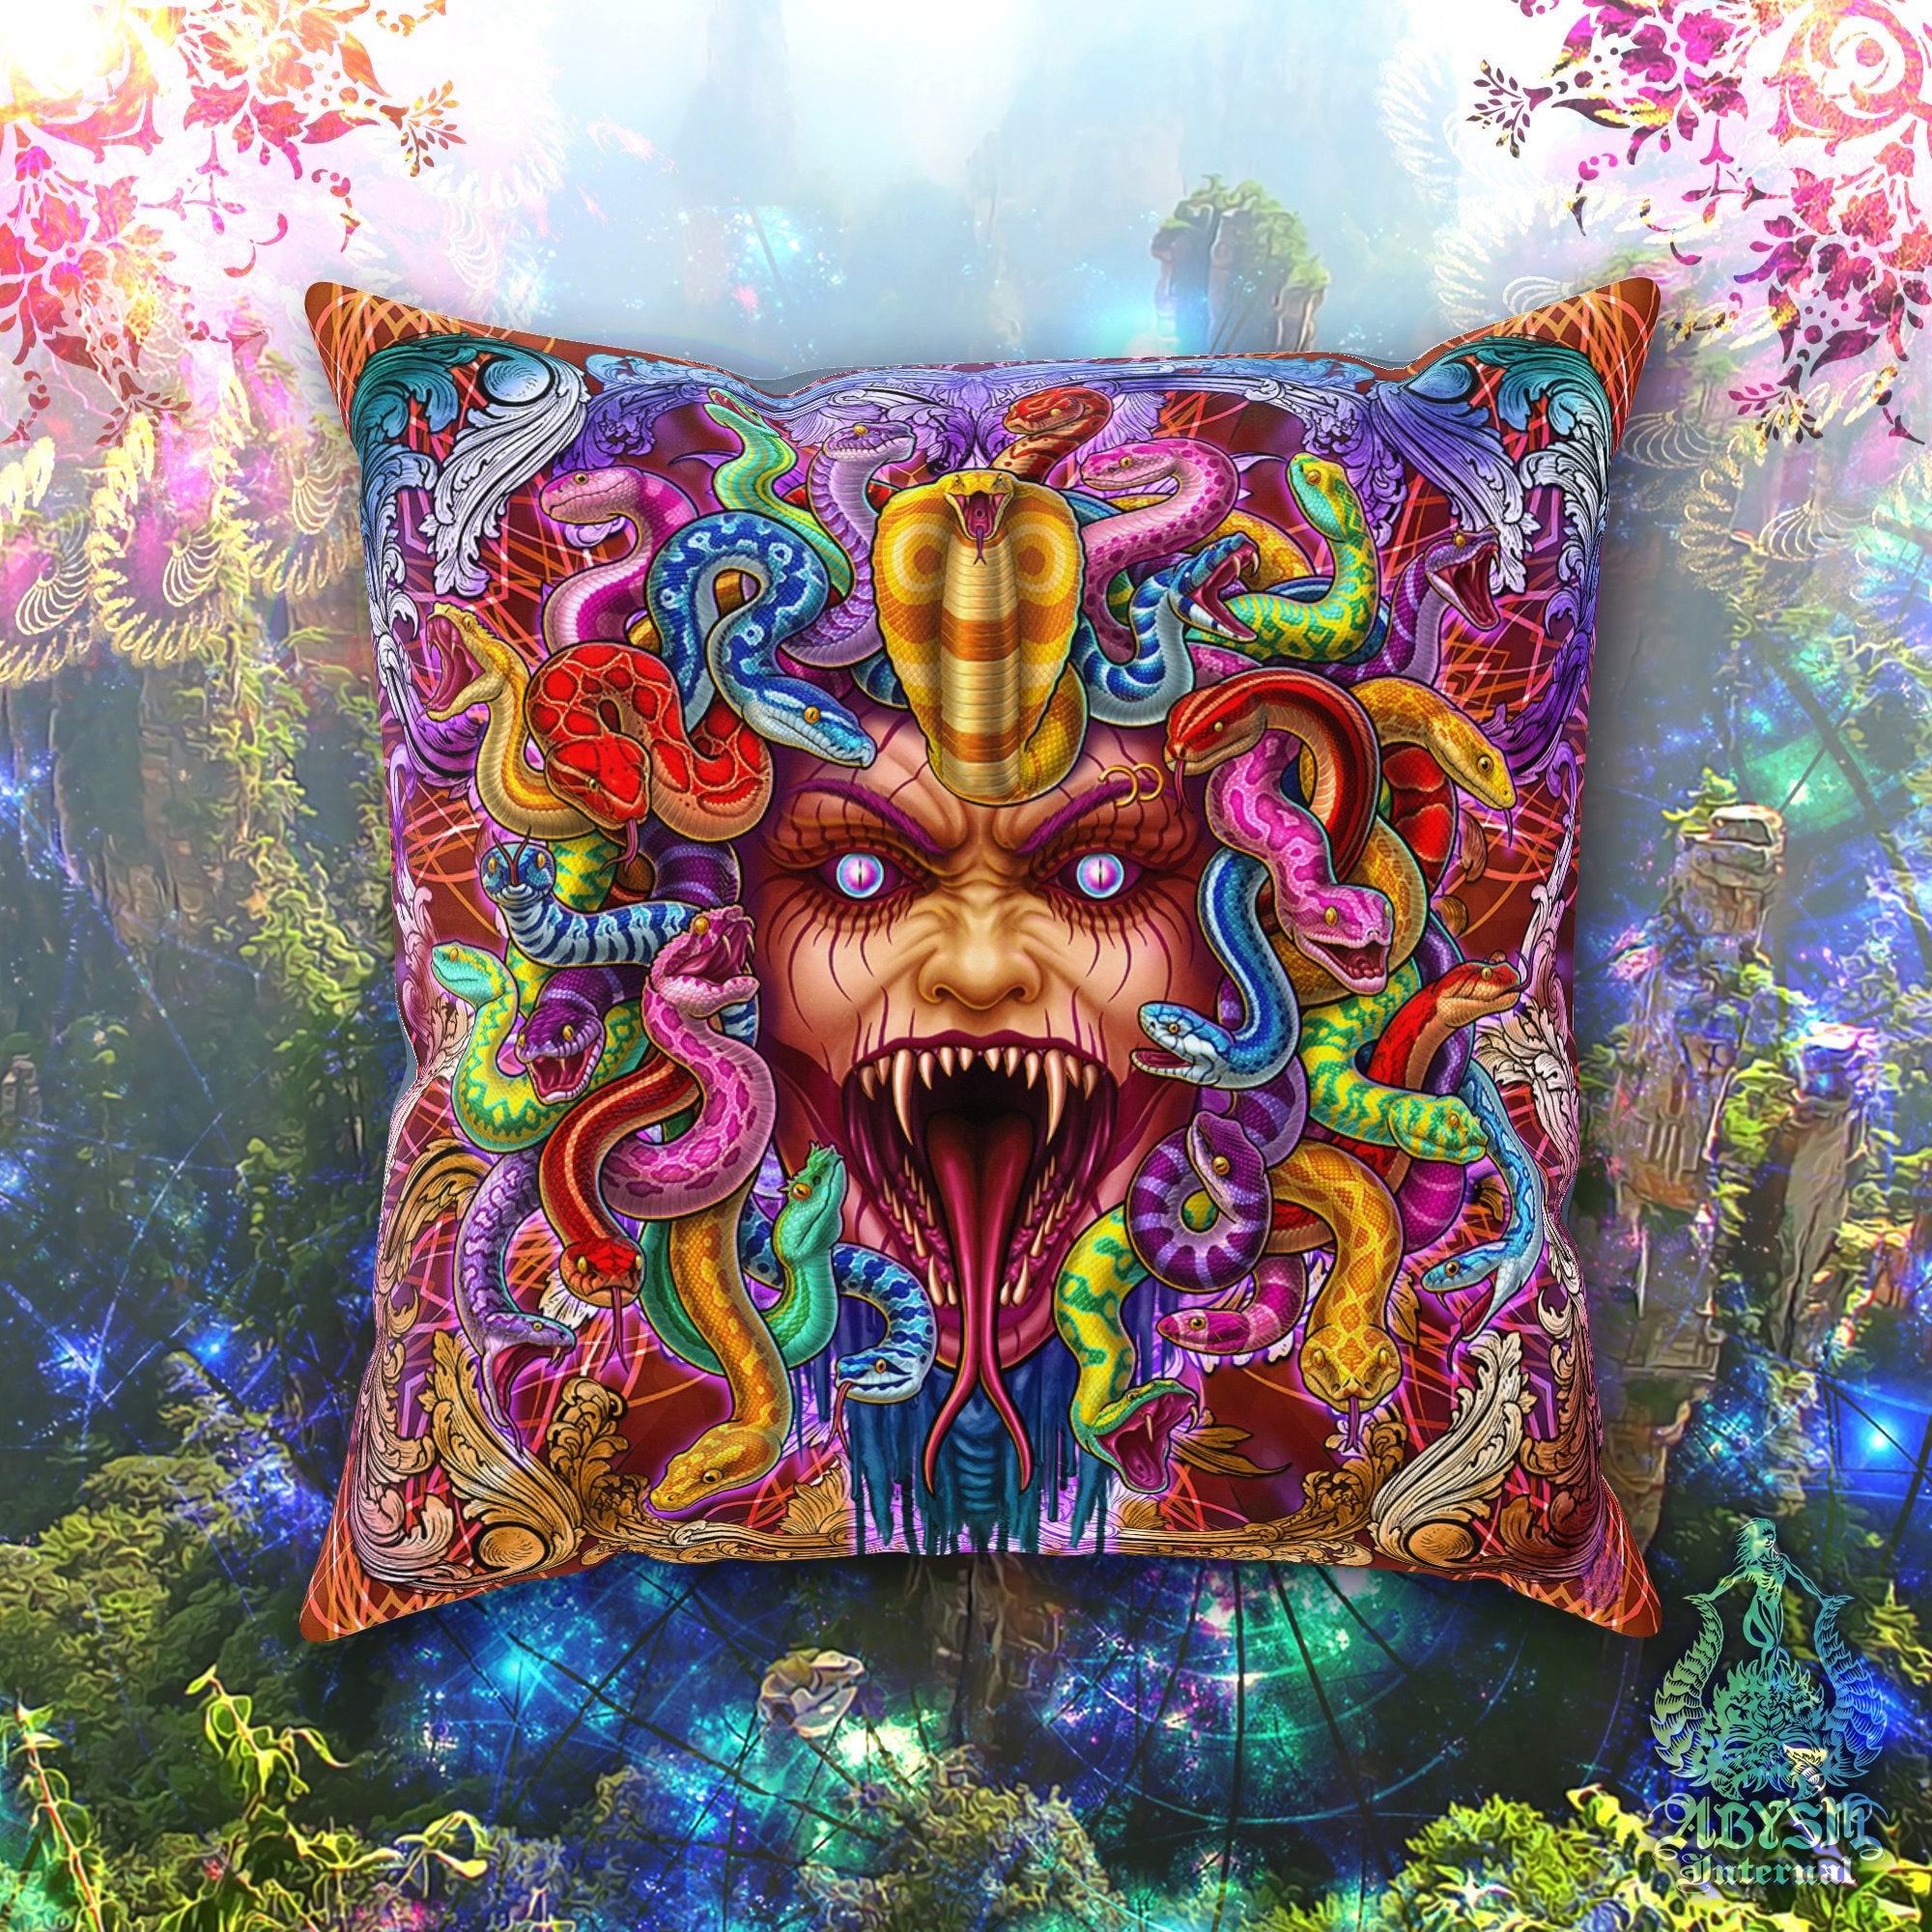 Psychedelic Throw Pillow, Decorative Accent Pillow, Square Cushion Cover, Medusa, Indie and Trippy Room Decor, Eclectic Design - Psy, 2 Faces - Abysm Internal